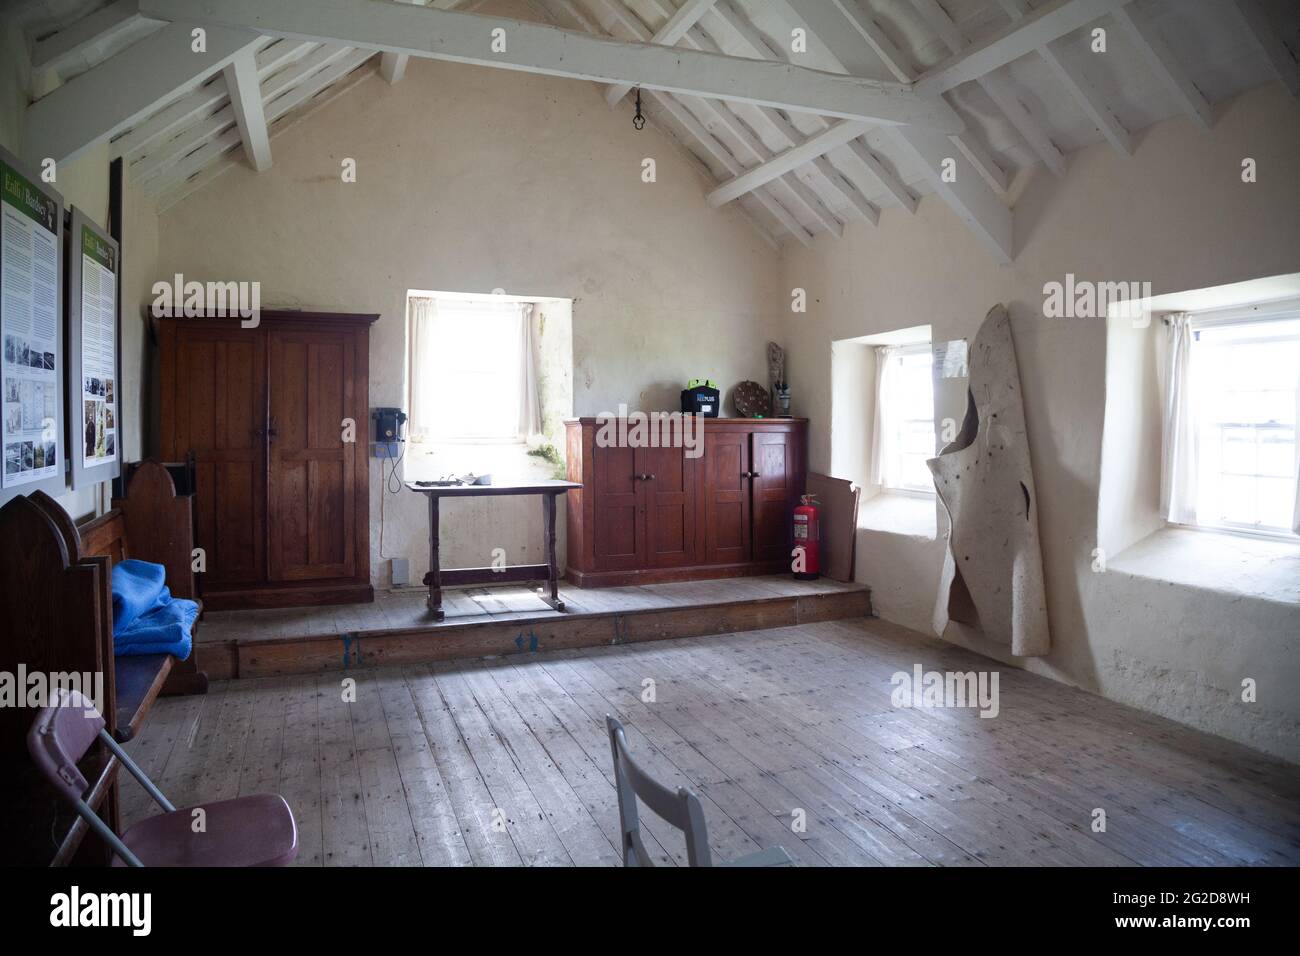 Interior of former school building on Ynys Enlli / Bardsey Island with wooden pews, cupboards, desk and wooden floor Stock Photo